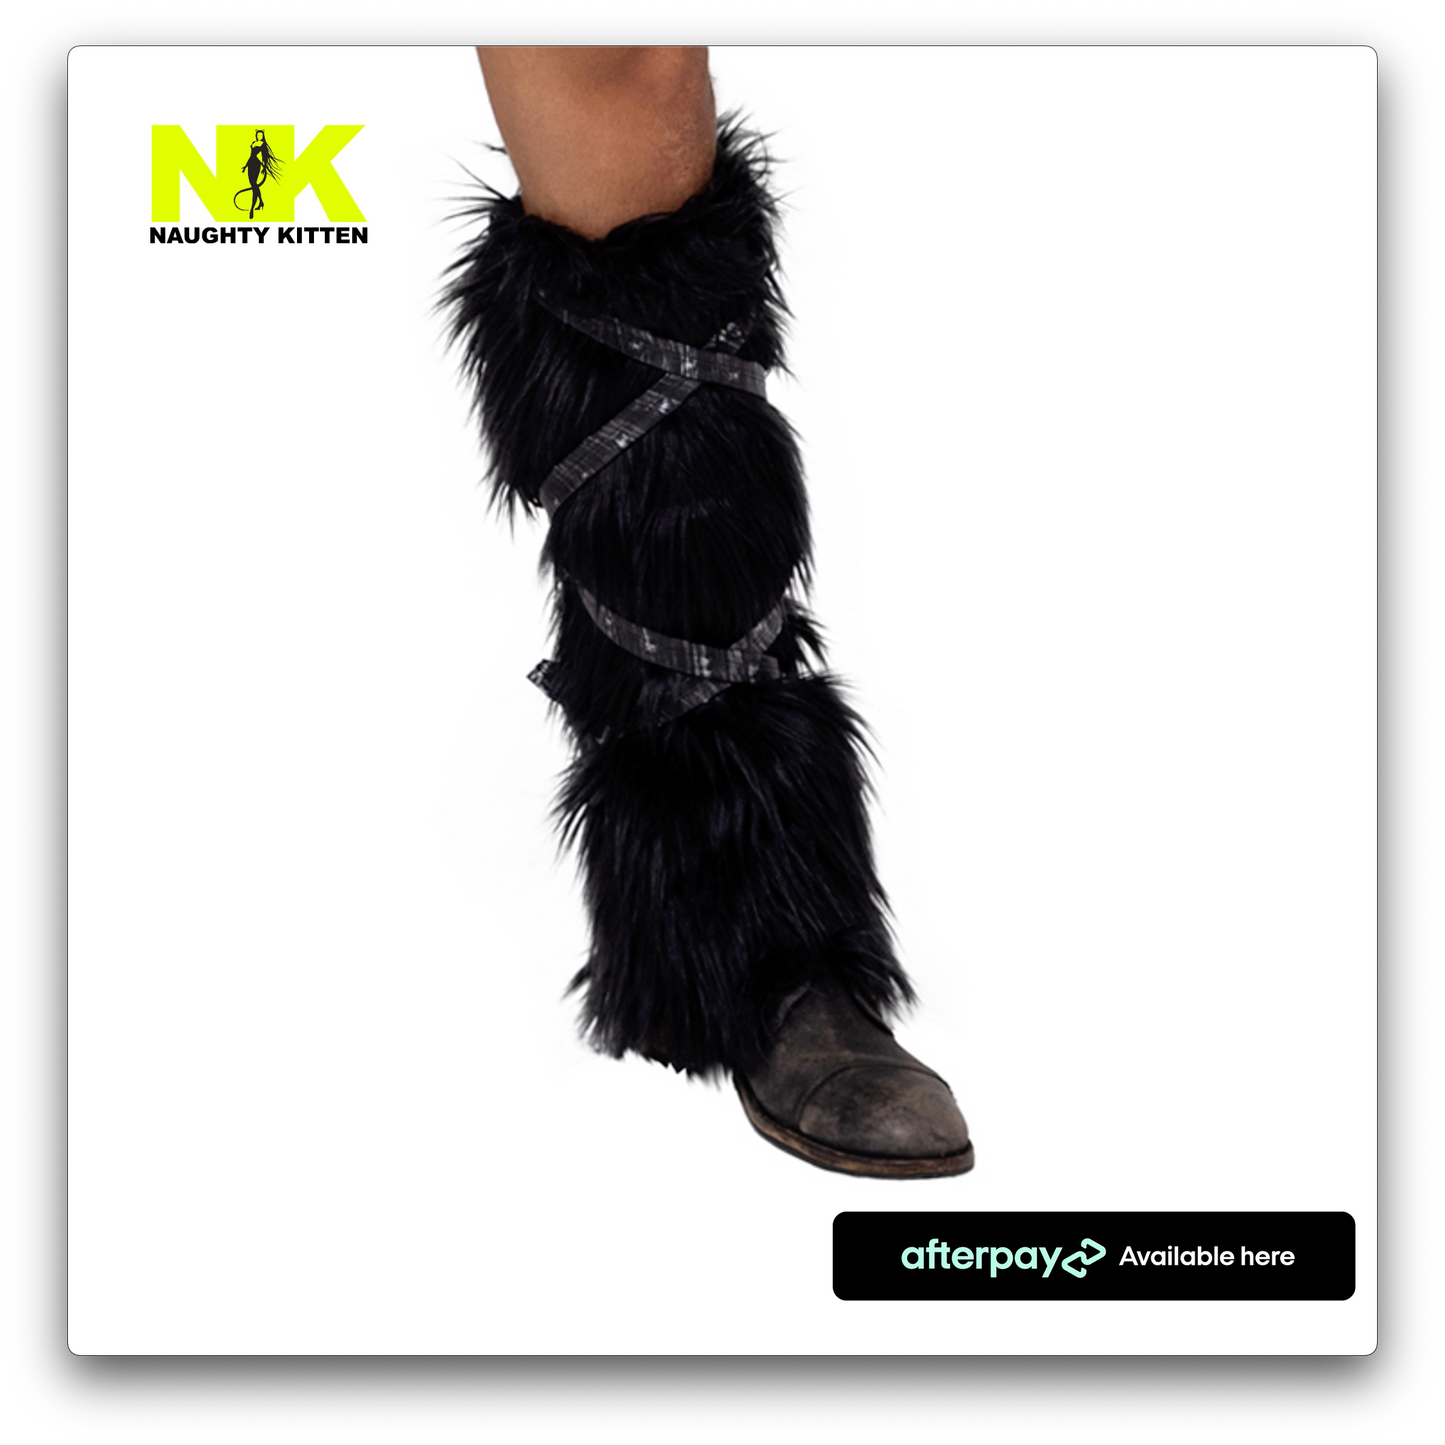 Naughty Kitten Clothing Pair of Black Faux Fur Leg Warmers Front View Halloween Costume Accessories